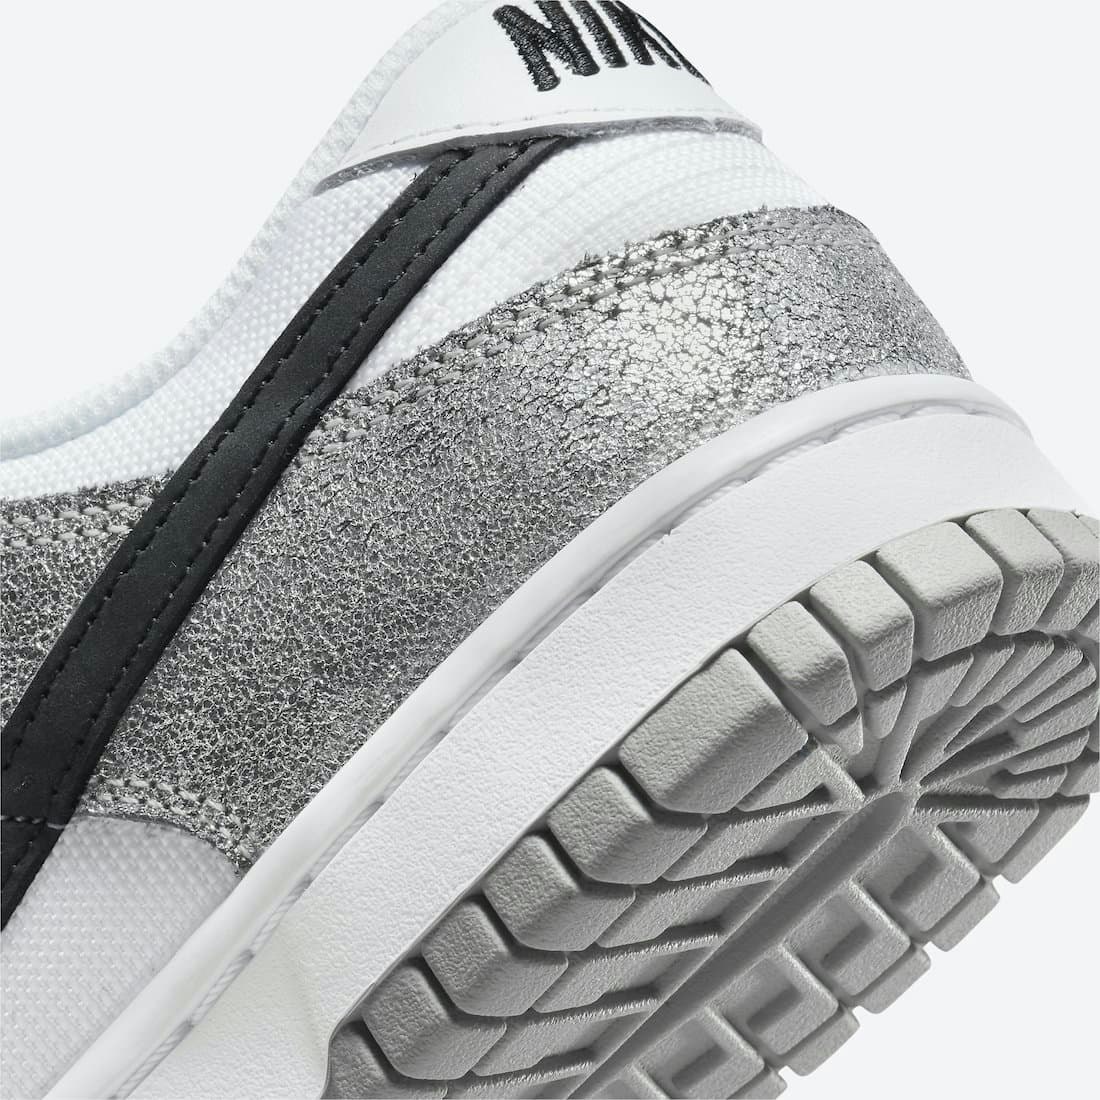 Nike Dunk Low "Cracked Silver"